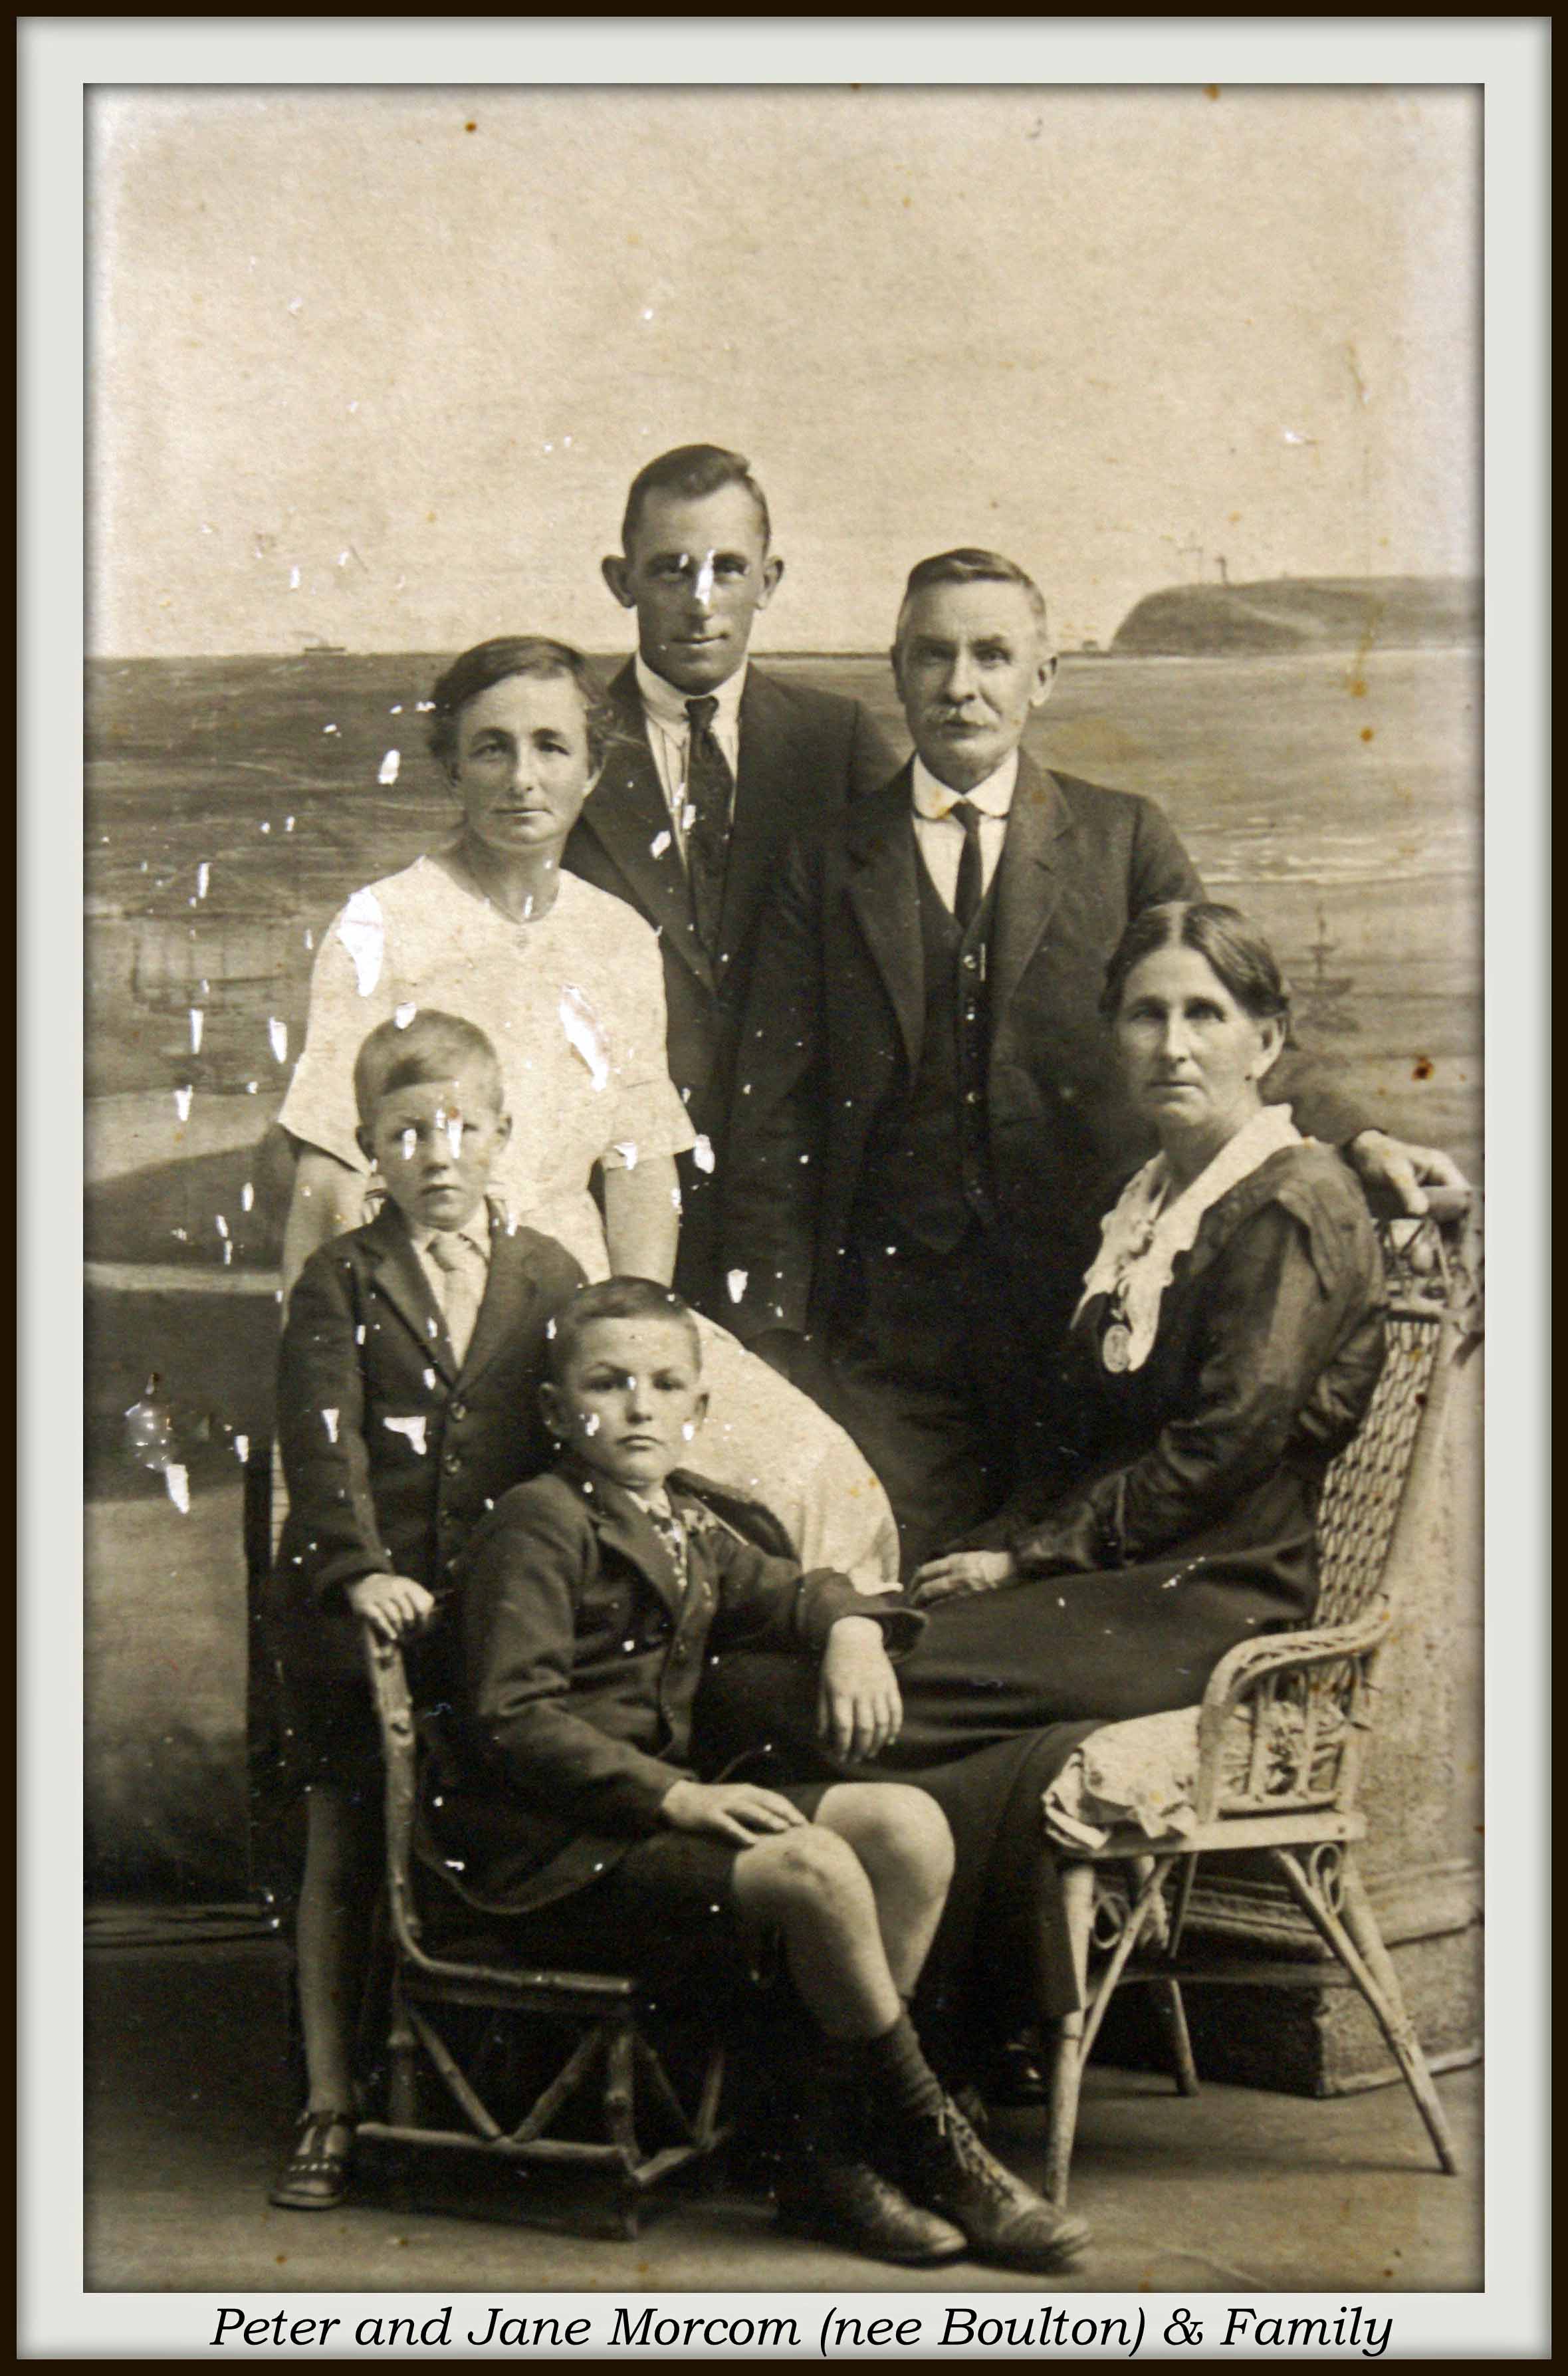 Peter MORCOM's family in South Africa